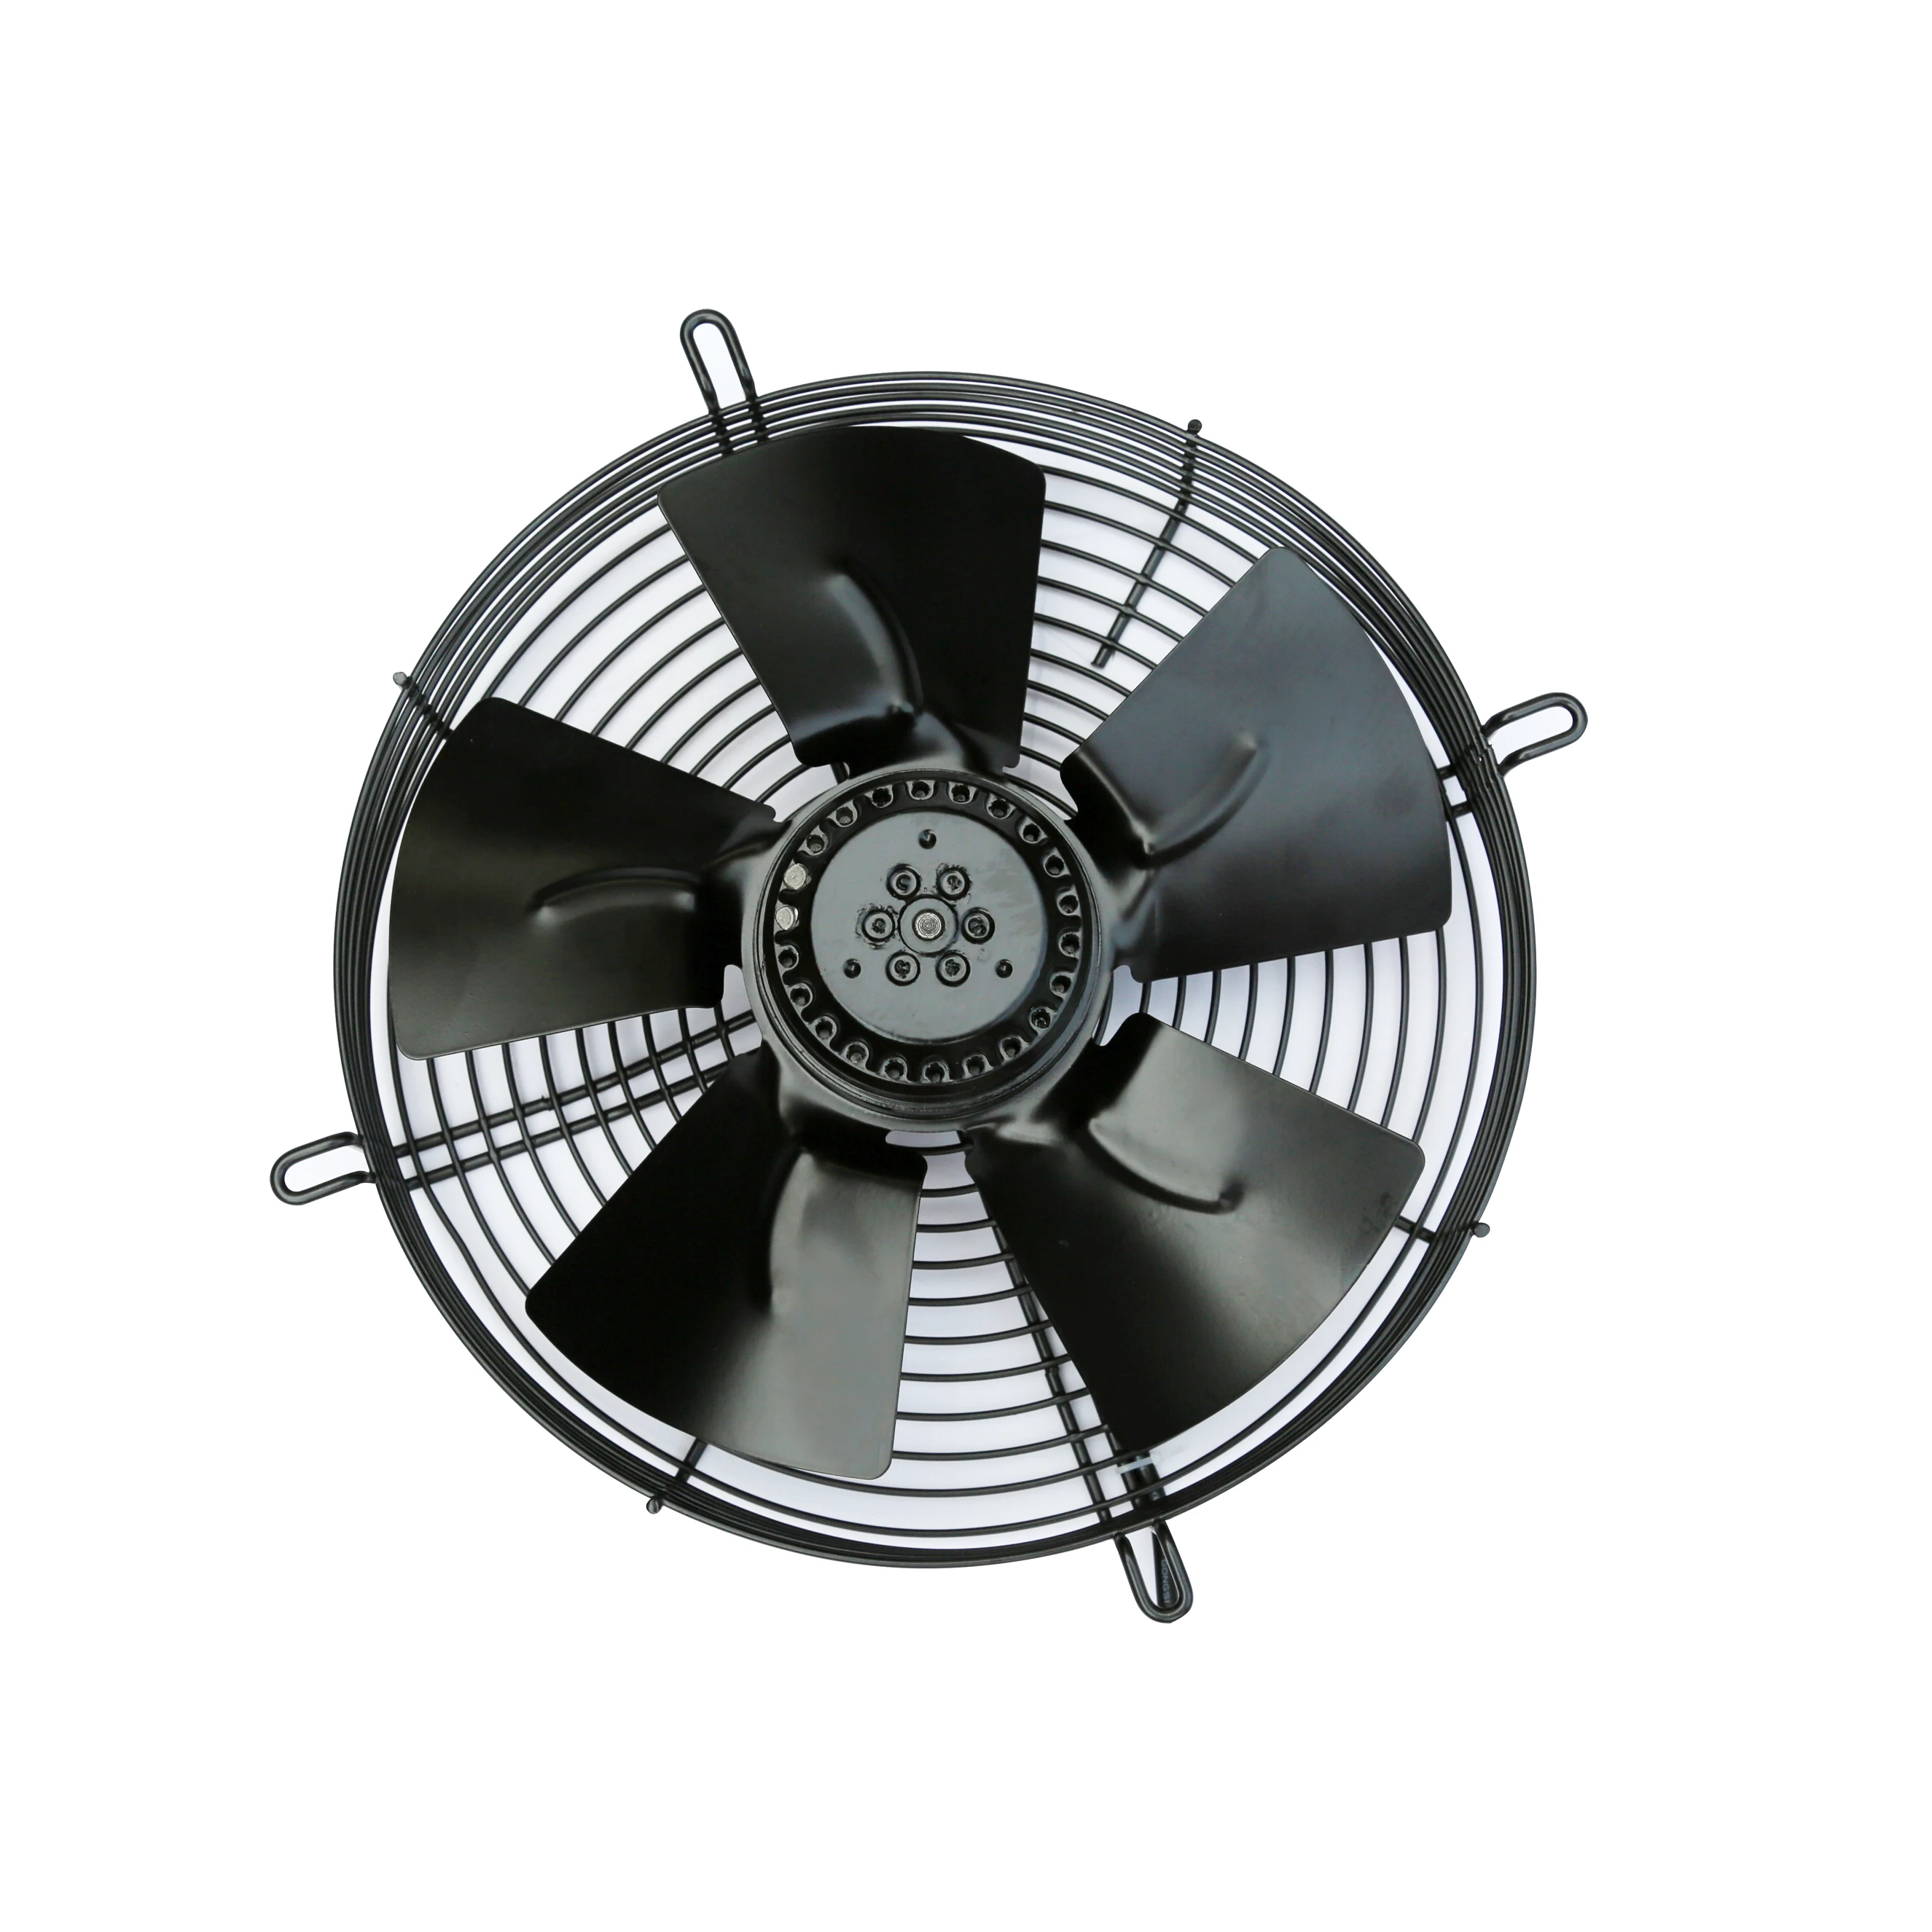 SUCTION 4Pole with juction box 350mm Ref &Air-Con AXIAL FAN 380V 3phase 